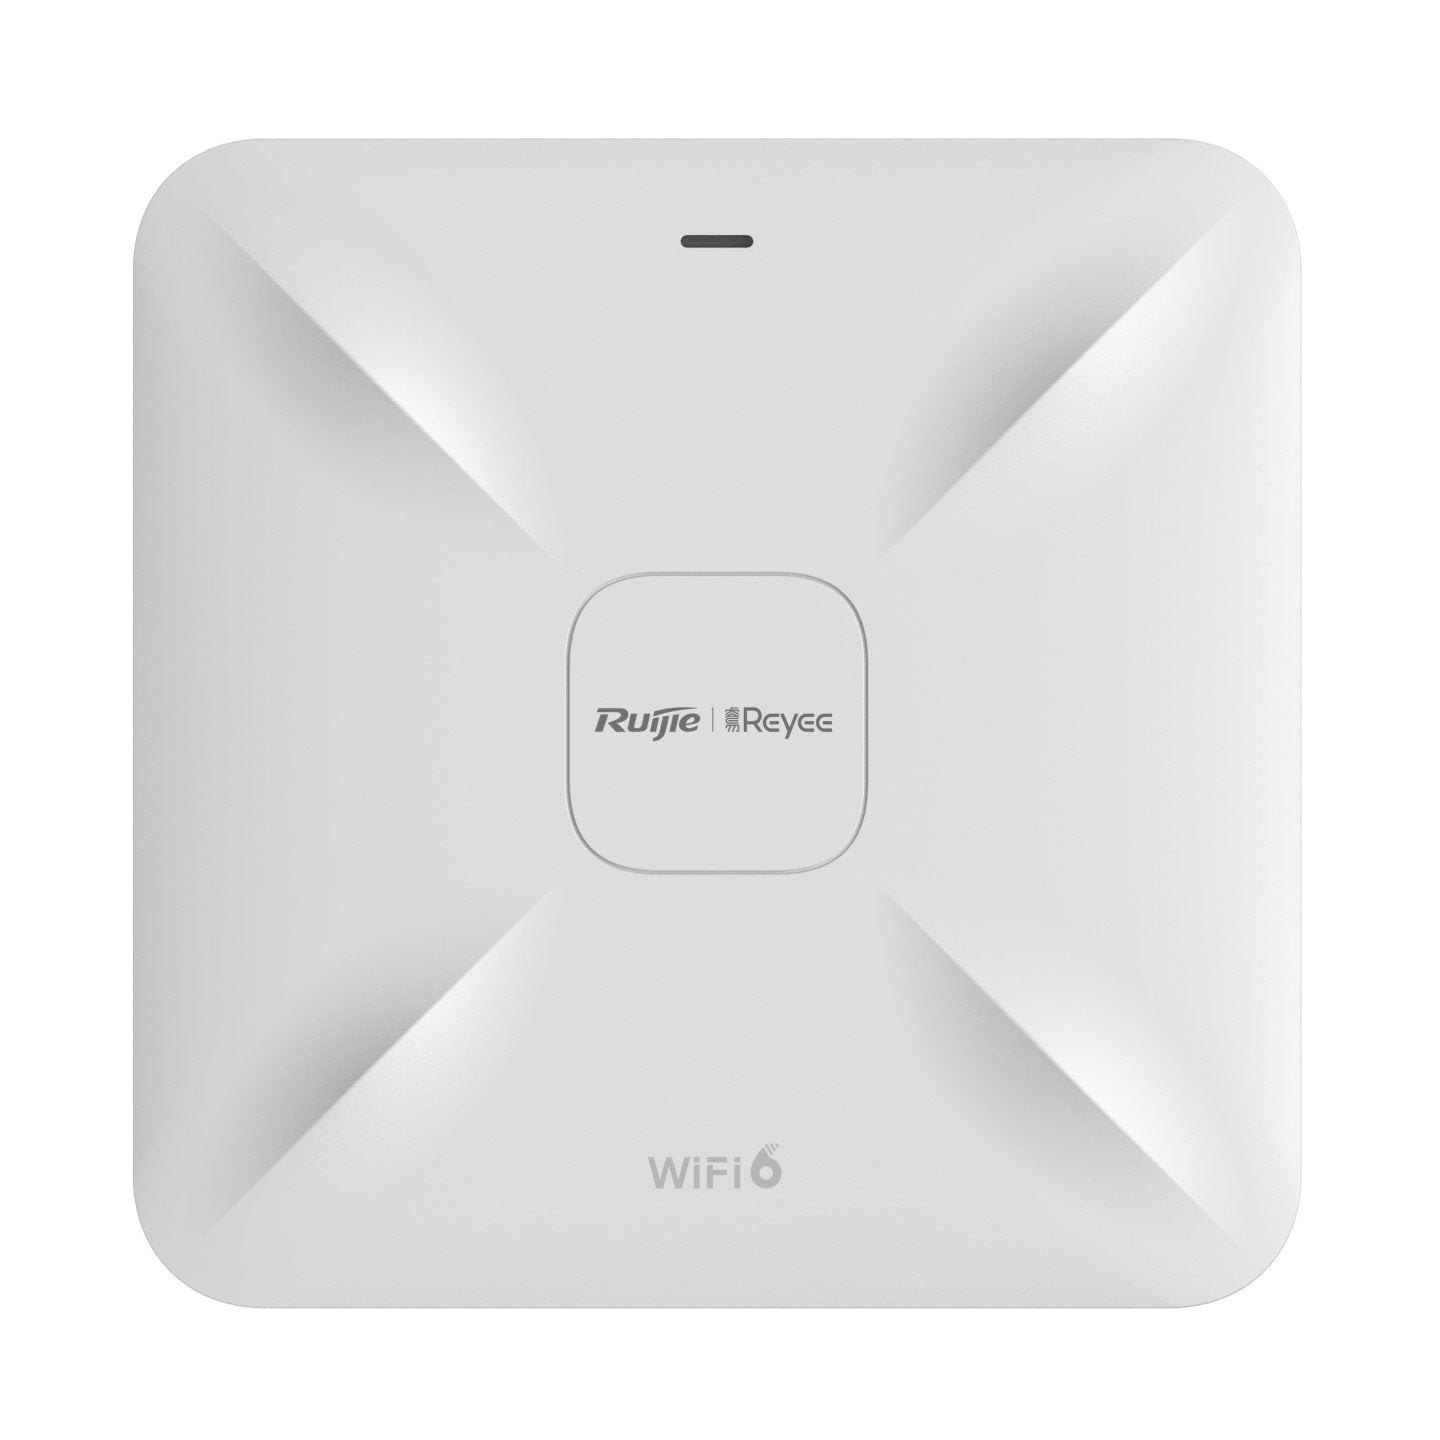 Ruijie* Reyee Internal WiFi6 Gigabit Access Point AX3200, 800Mbps, Dual Band Up To 2402Mbps, POE / 12VDC (Up To 30M Range)